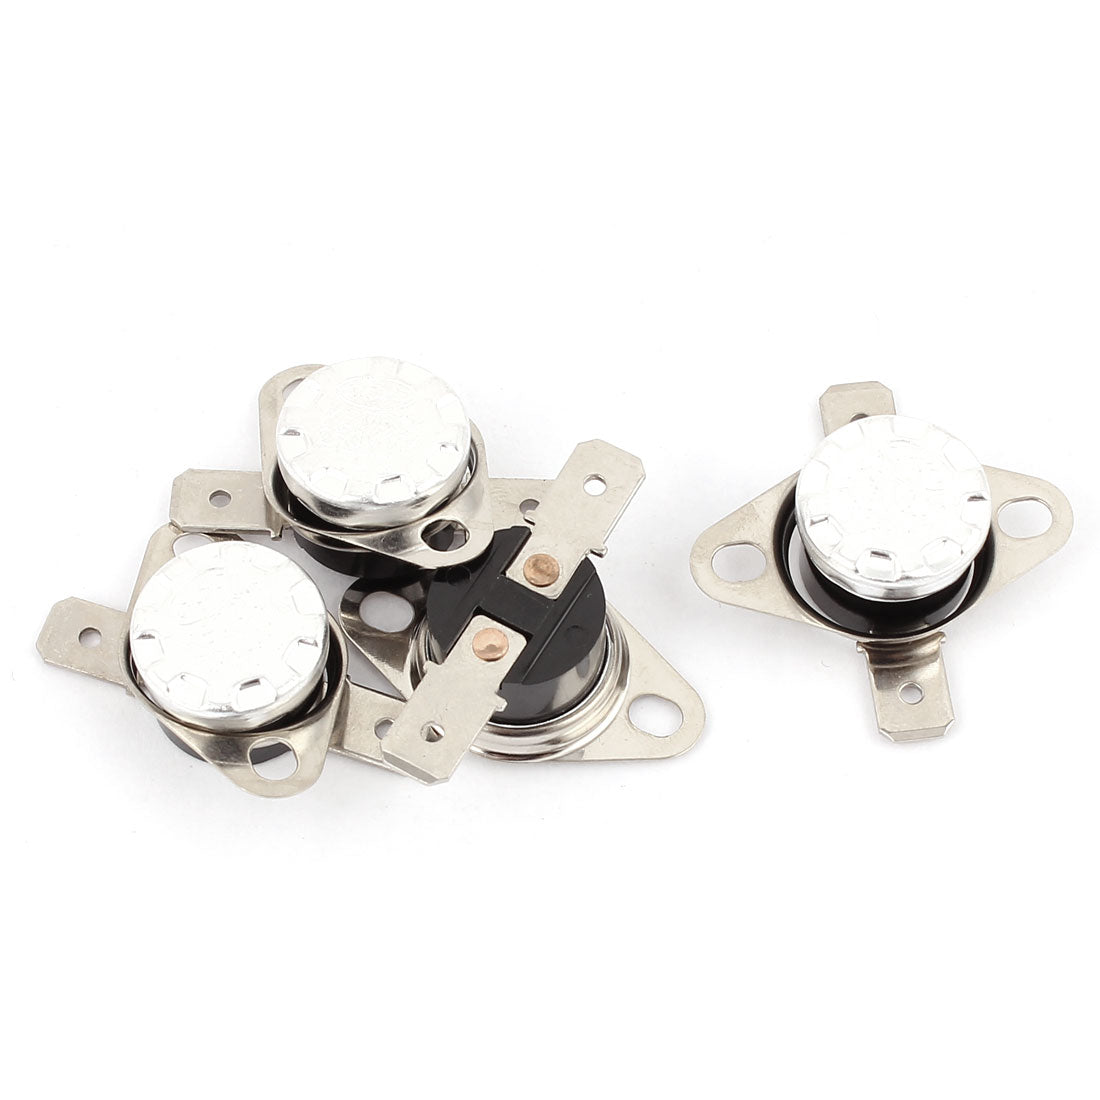 uxcell Uxcell 4PCS KSD301 70C 158F NC Thermostat Temperature Thermal Control Switch